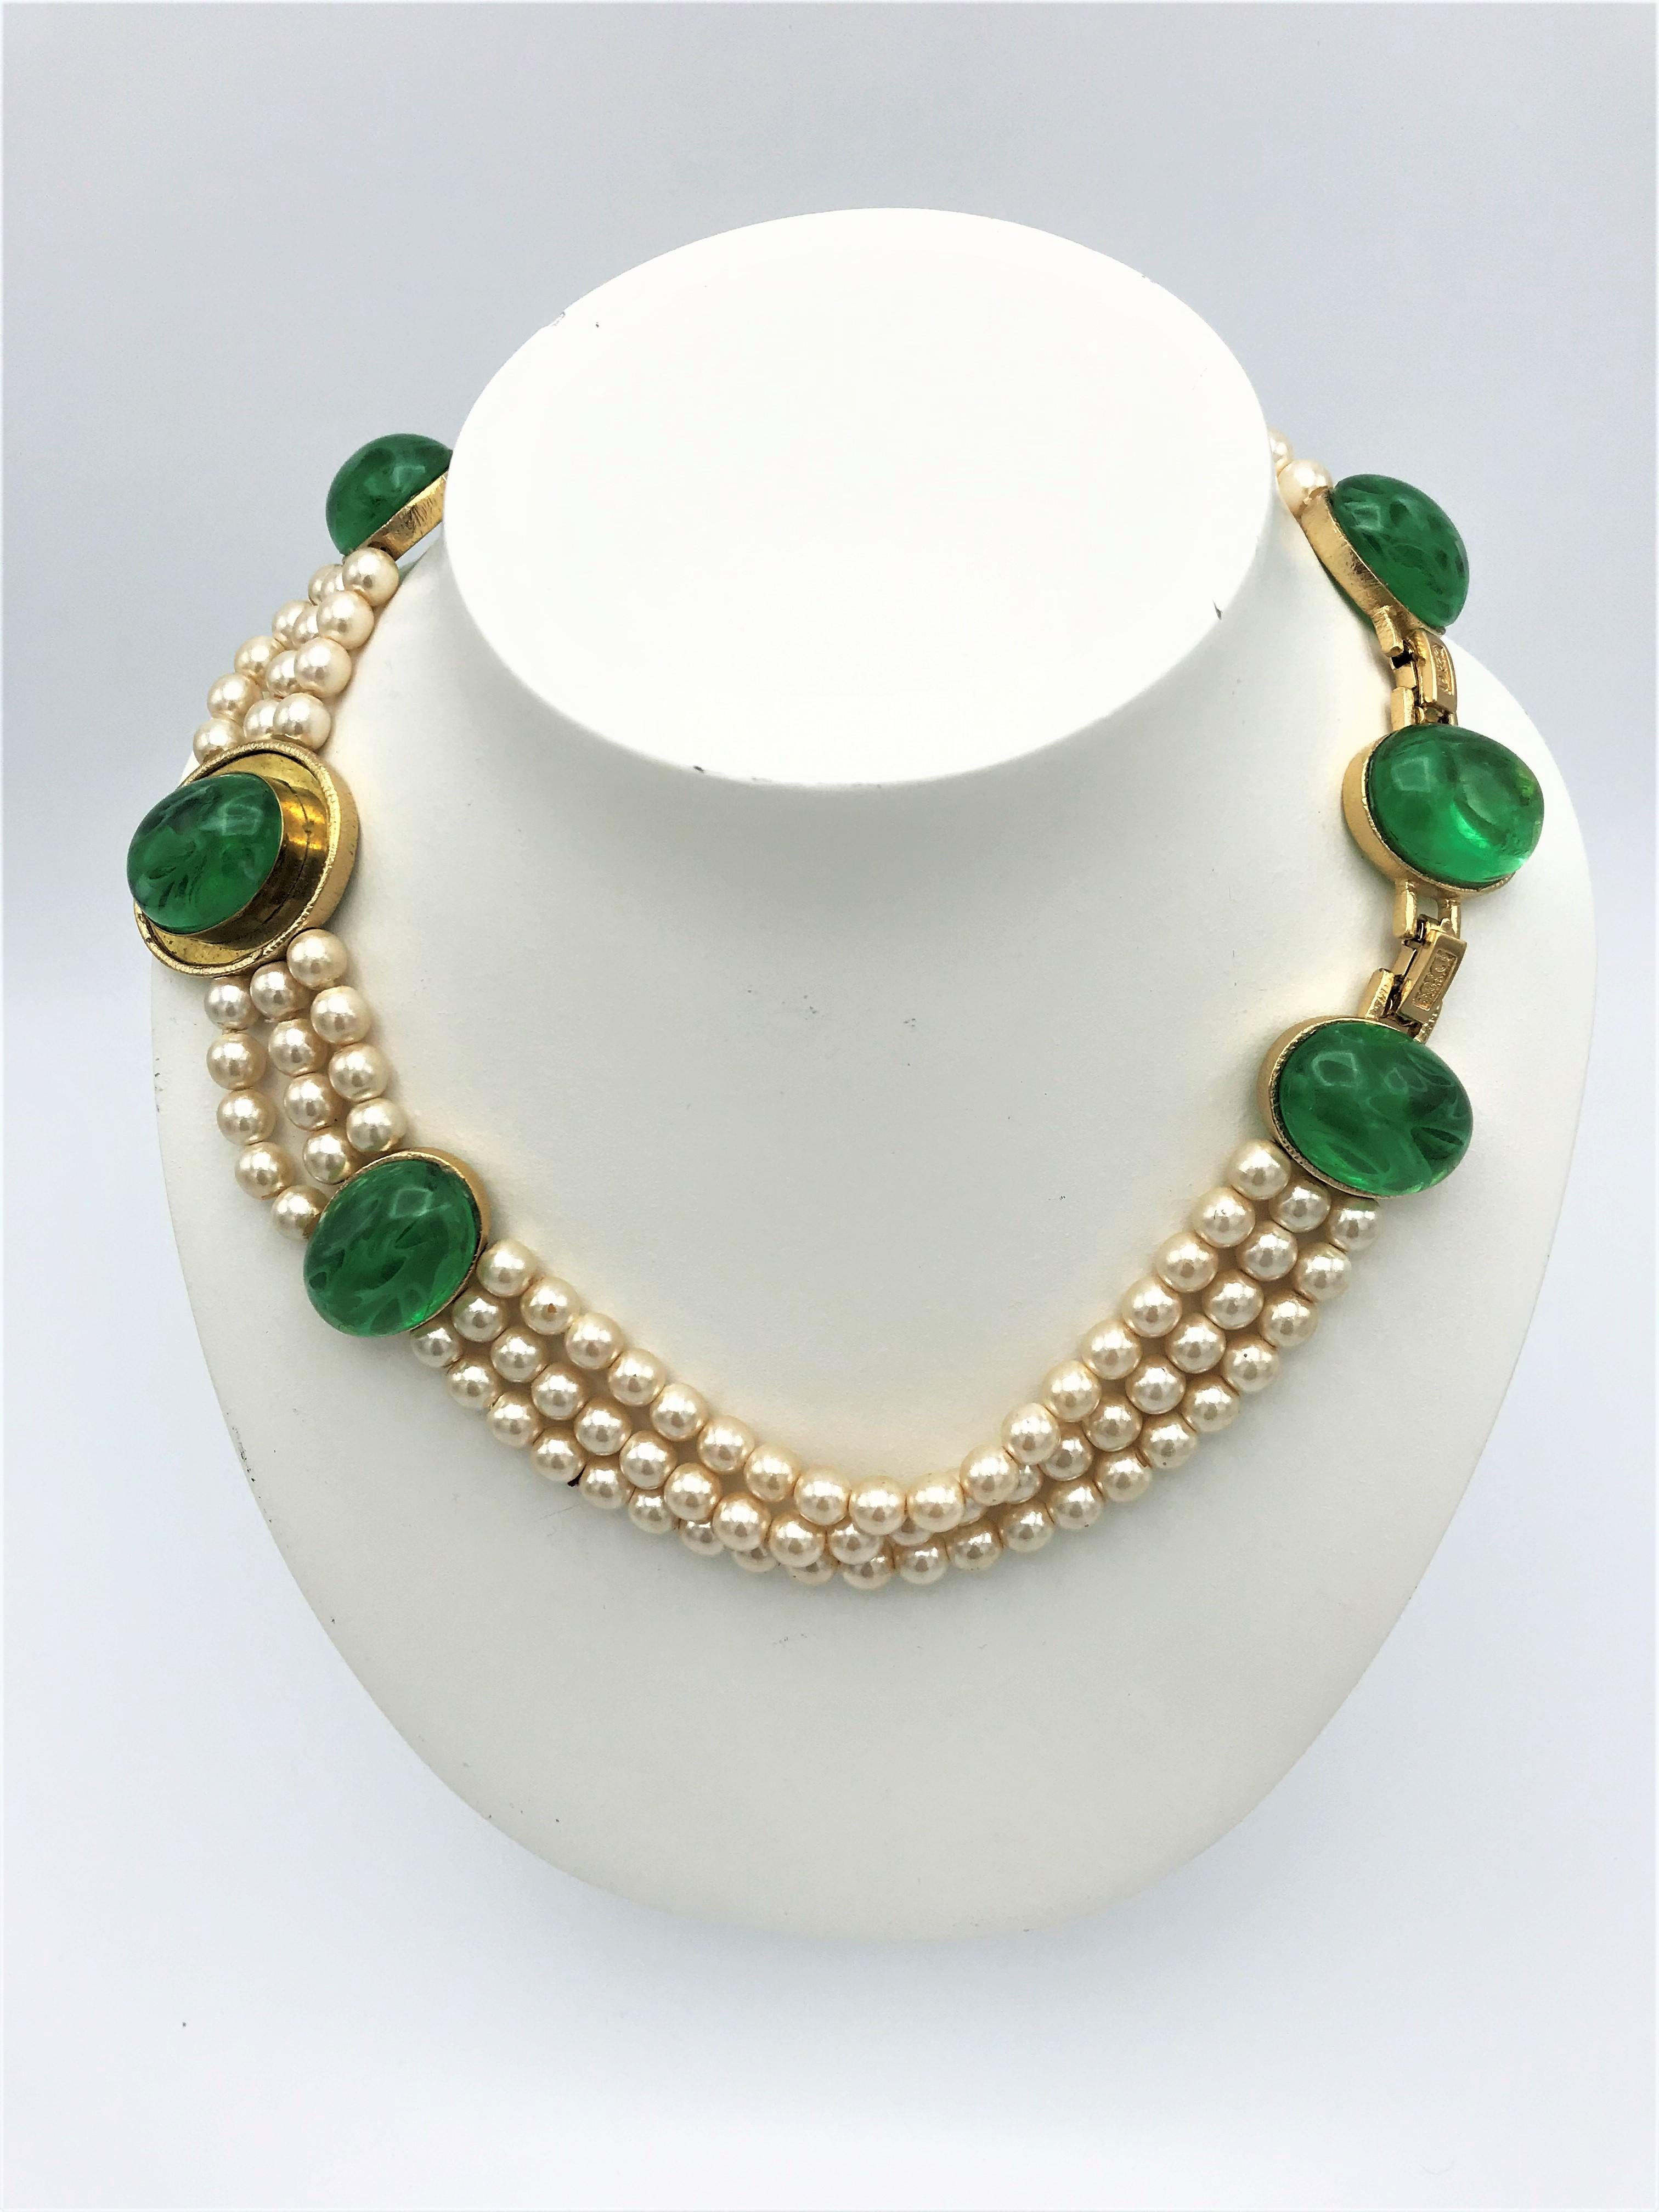 Artist Vintage Christian Dior necklace 1970-80 faux pearls with green  Gripoix